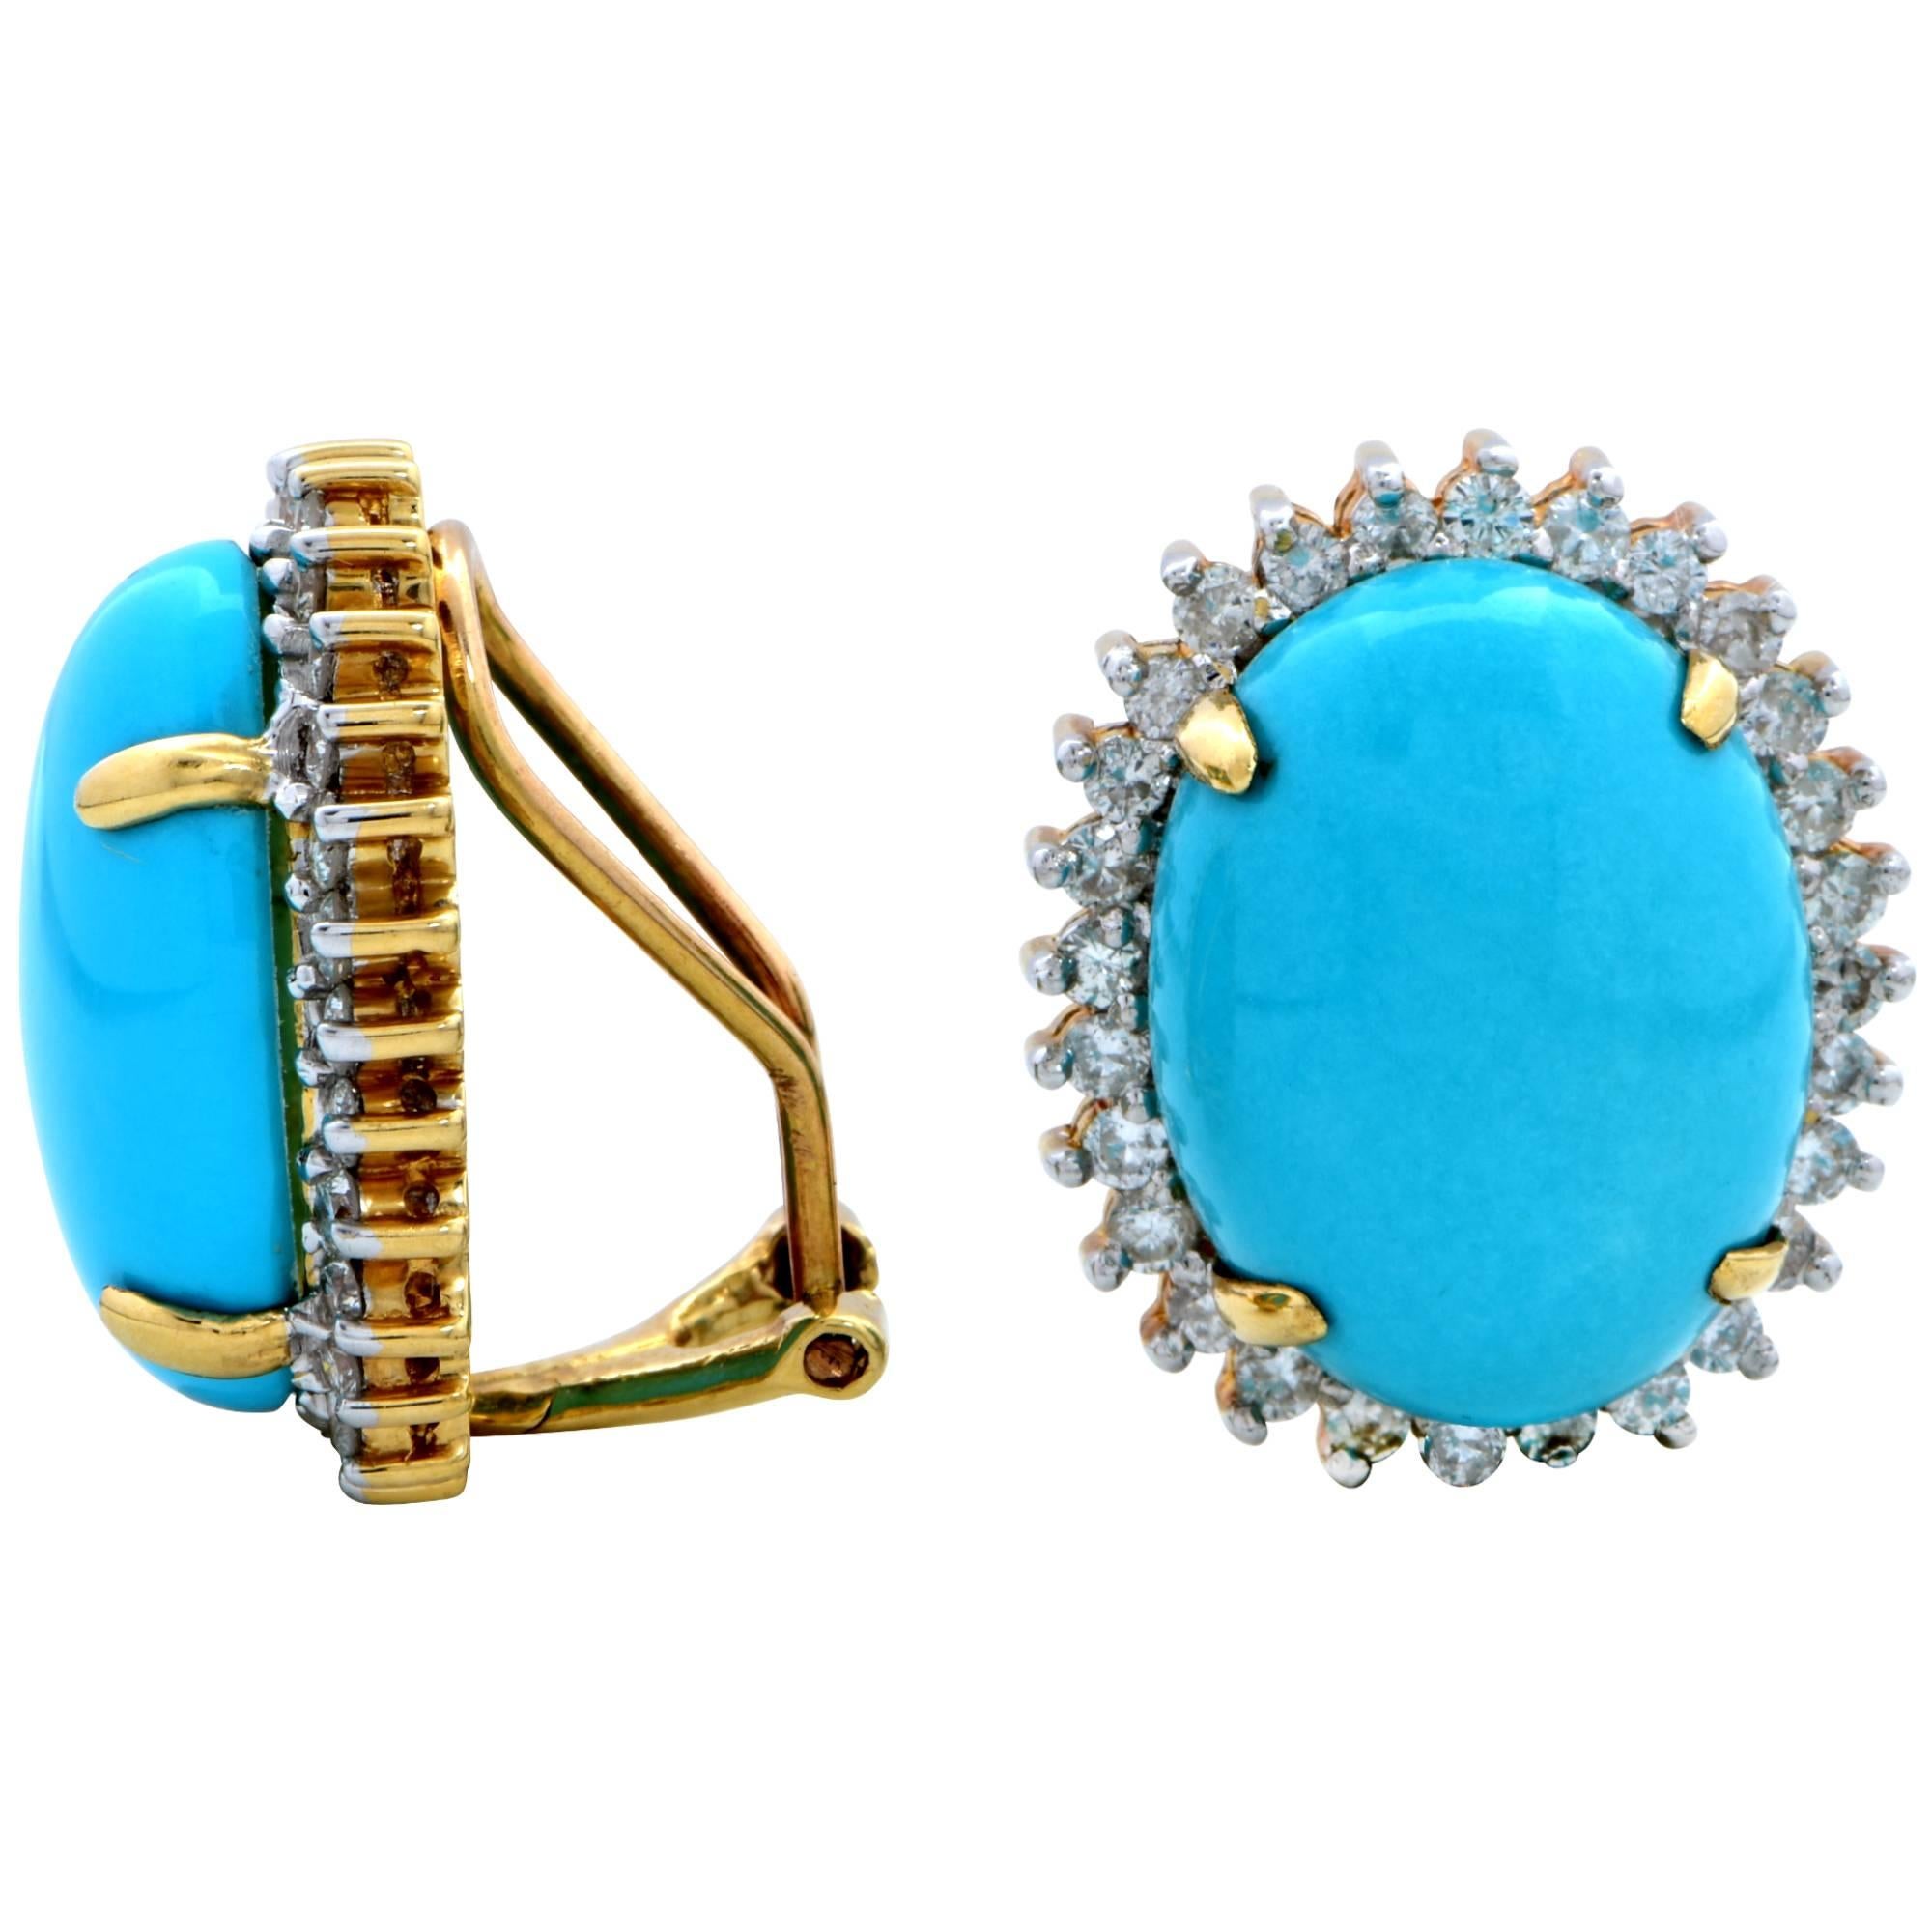 14k yellow gold earrings featuring turquoise cabochons surrounded by 56 round brilliant cut diamonds weighing approximately 1.10cts total, G color, SI clarity. These earrings measure 19.9mm x 16.3mm and are currently clip-ons.

It is stamped and/or